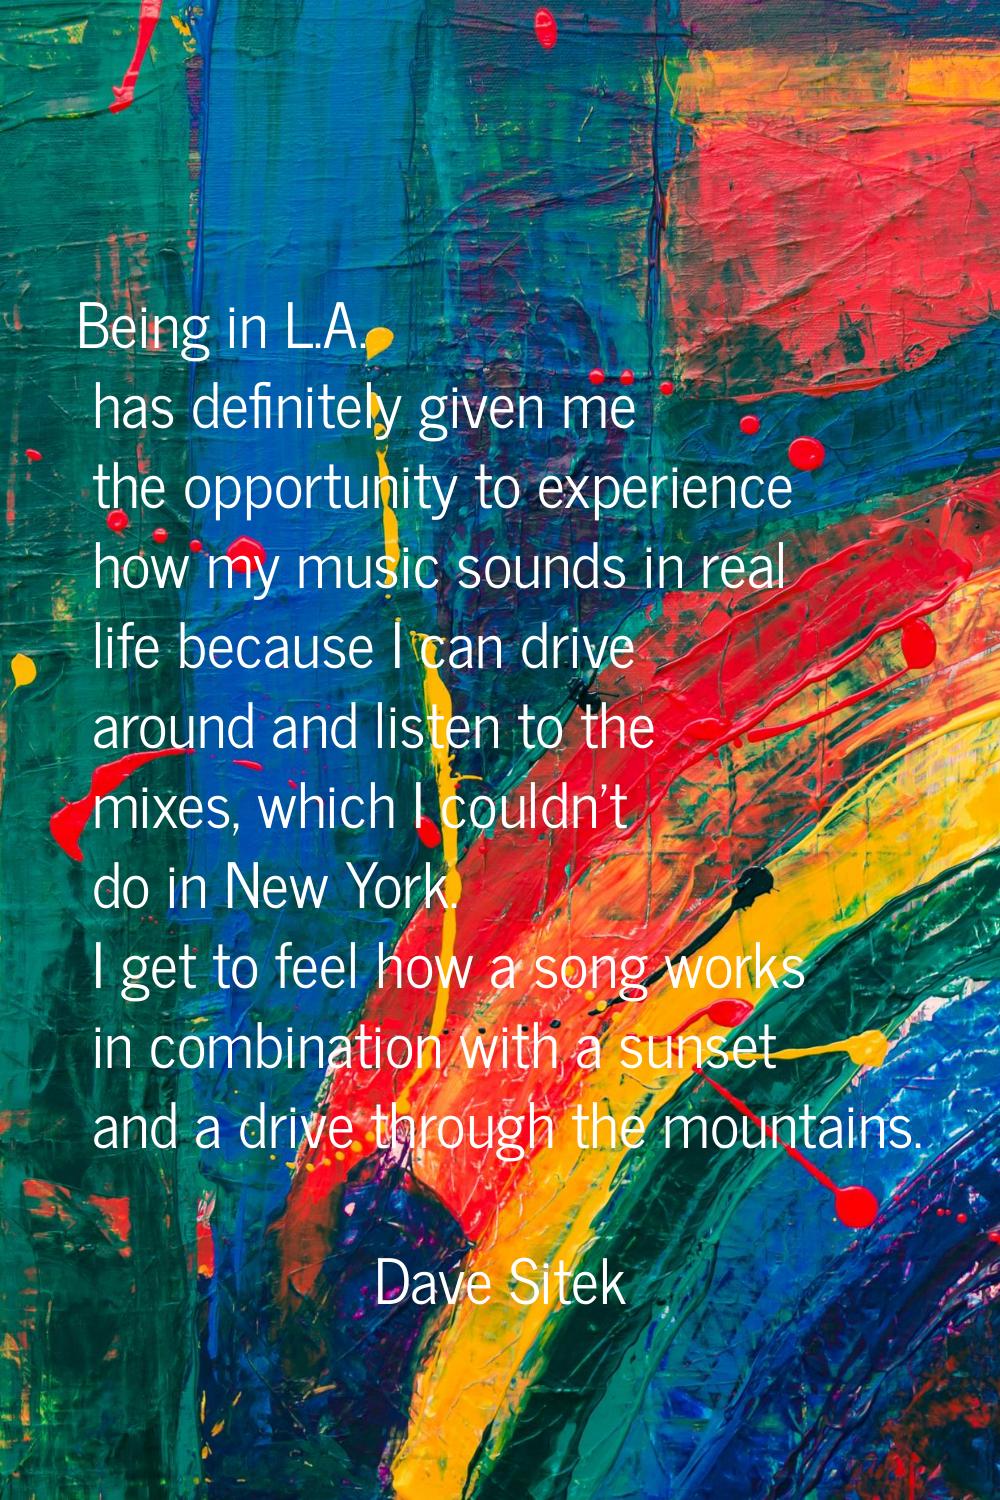 Being in L.A. has definitely given me the opportunity to experience how my music sounds in real lif